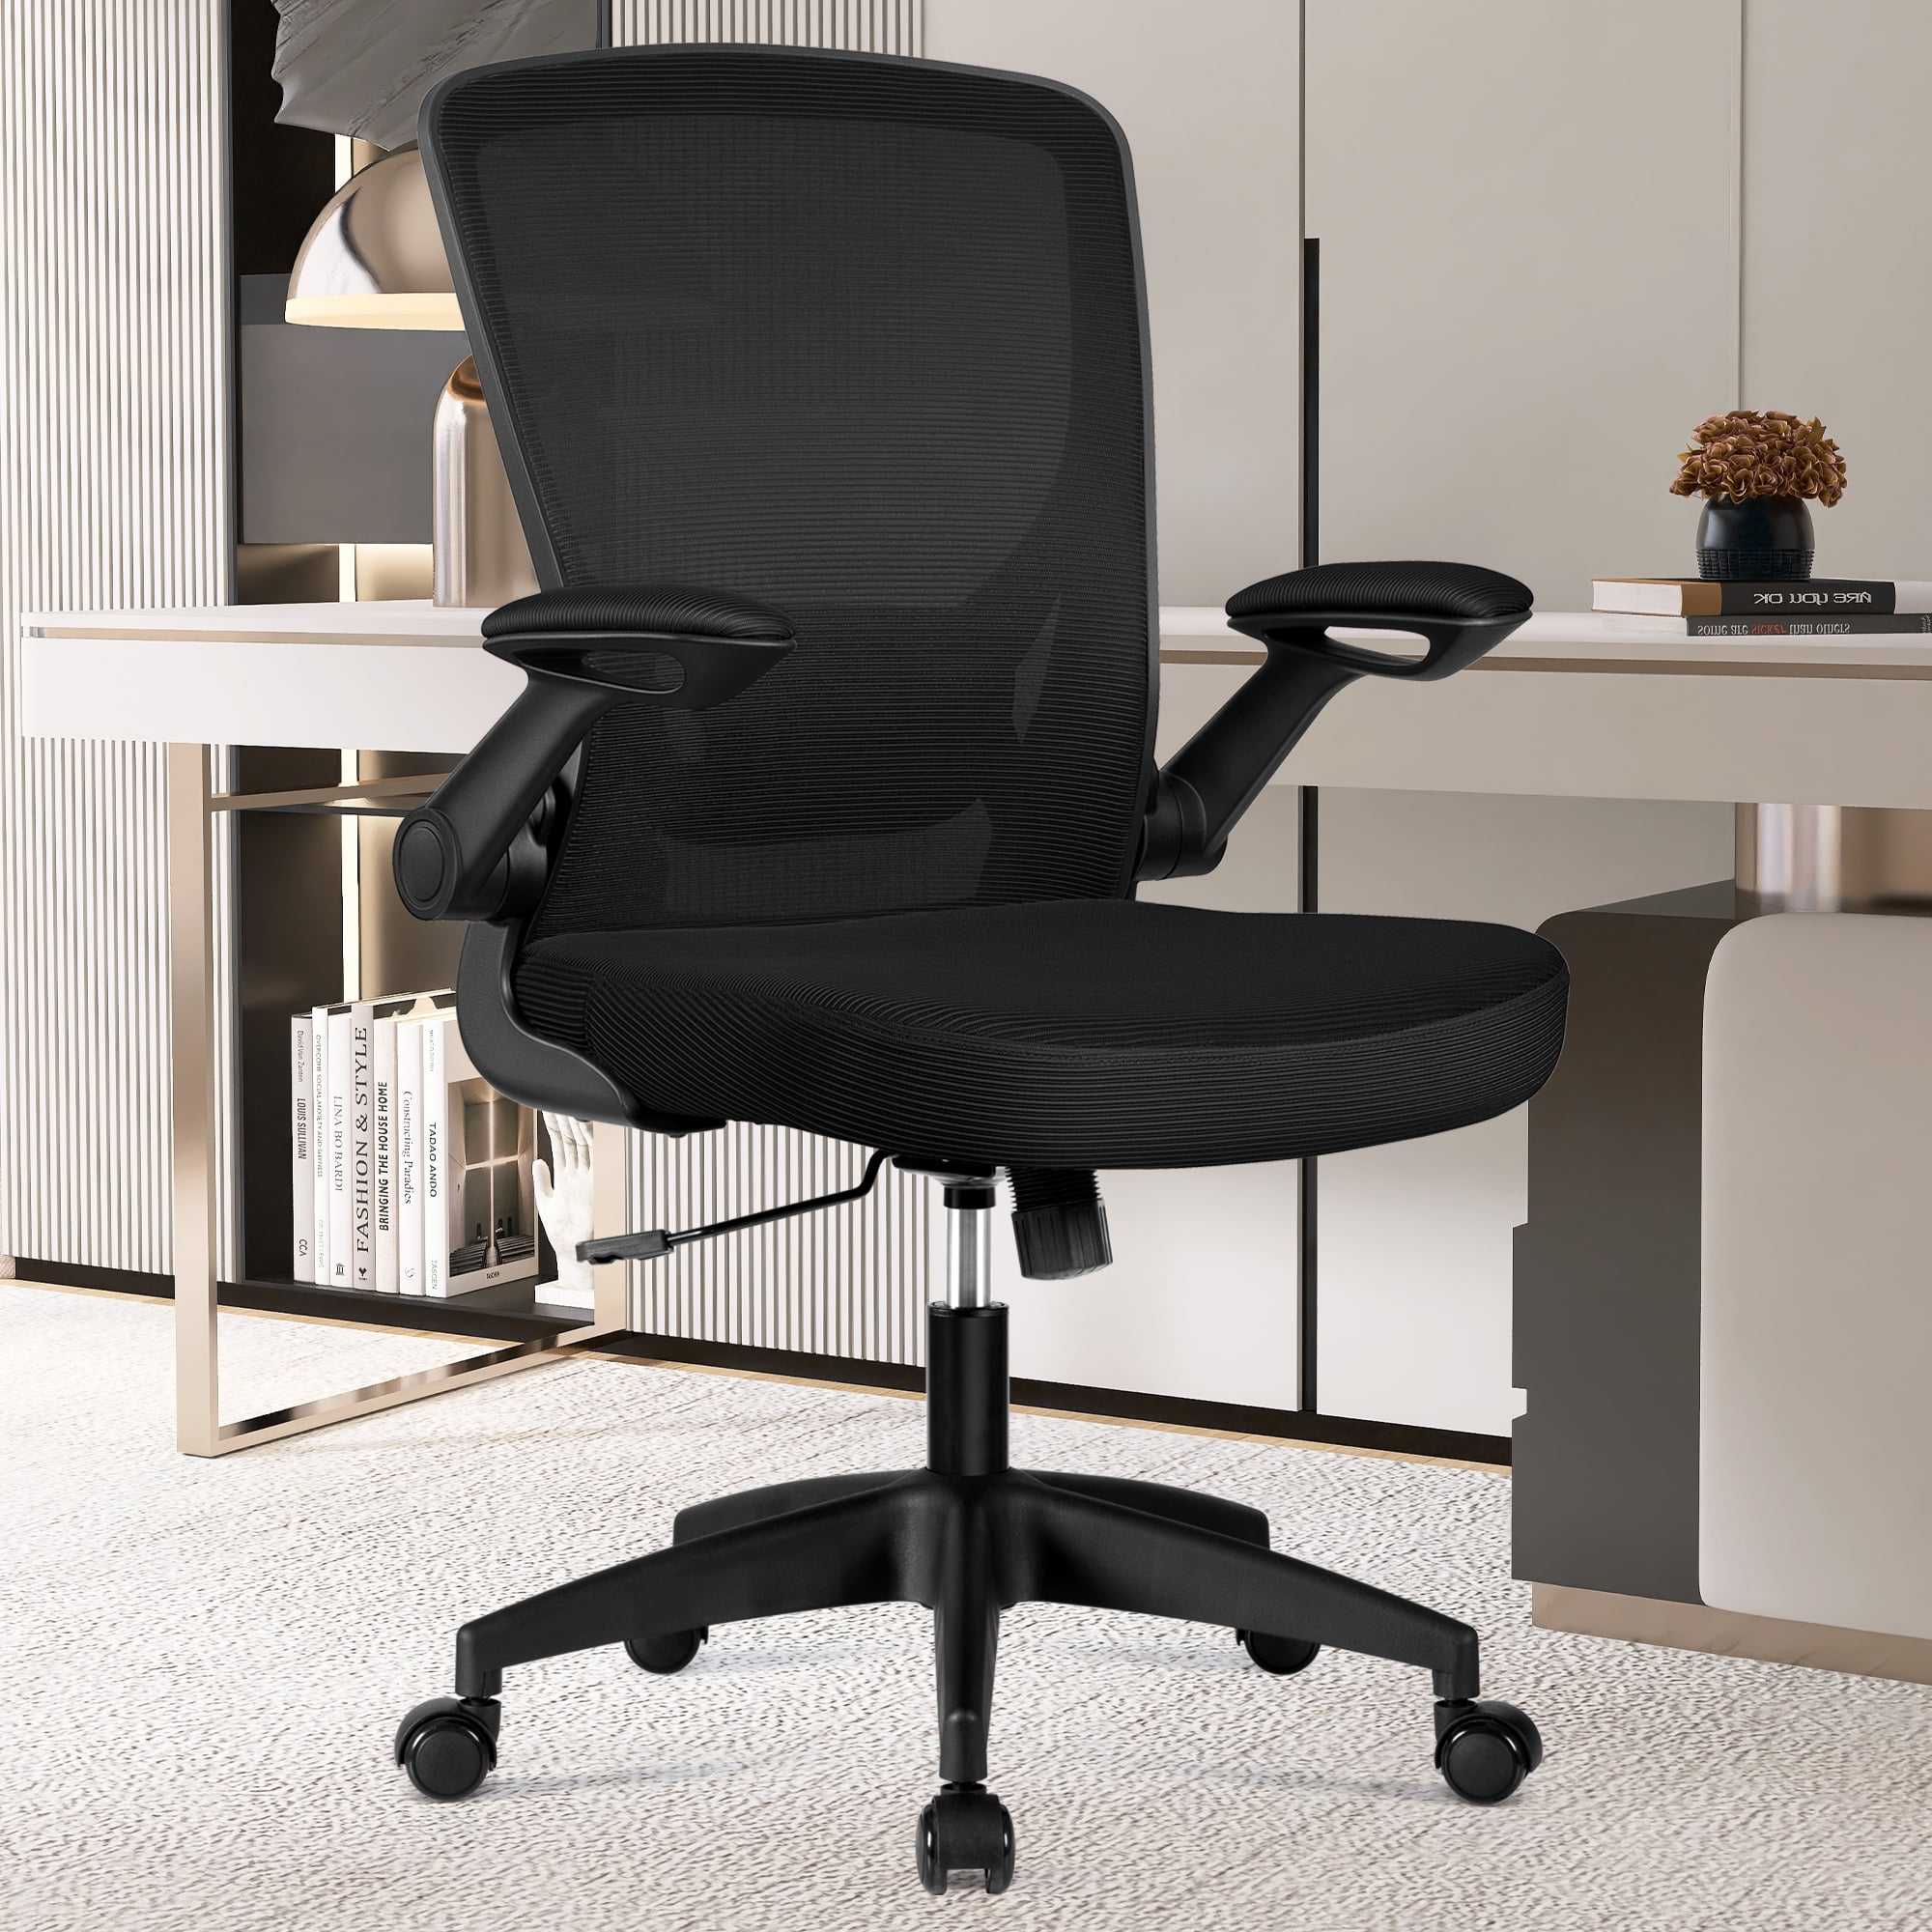 Coolhut Ergonomic Office Chair, Comfort Home Office Task Chair, Lumbar  Support Computer Chair with Flip-up Arms and Adjustable Height, Black 